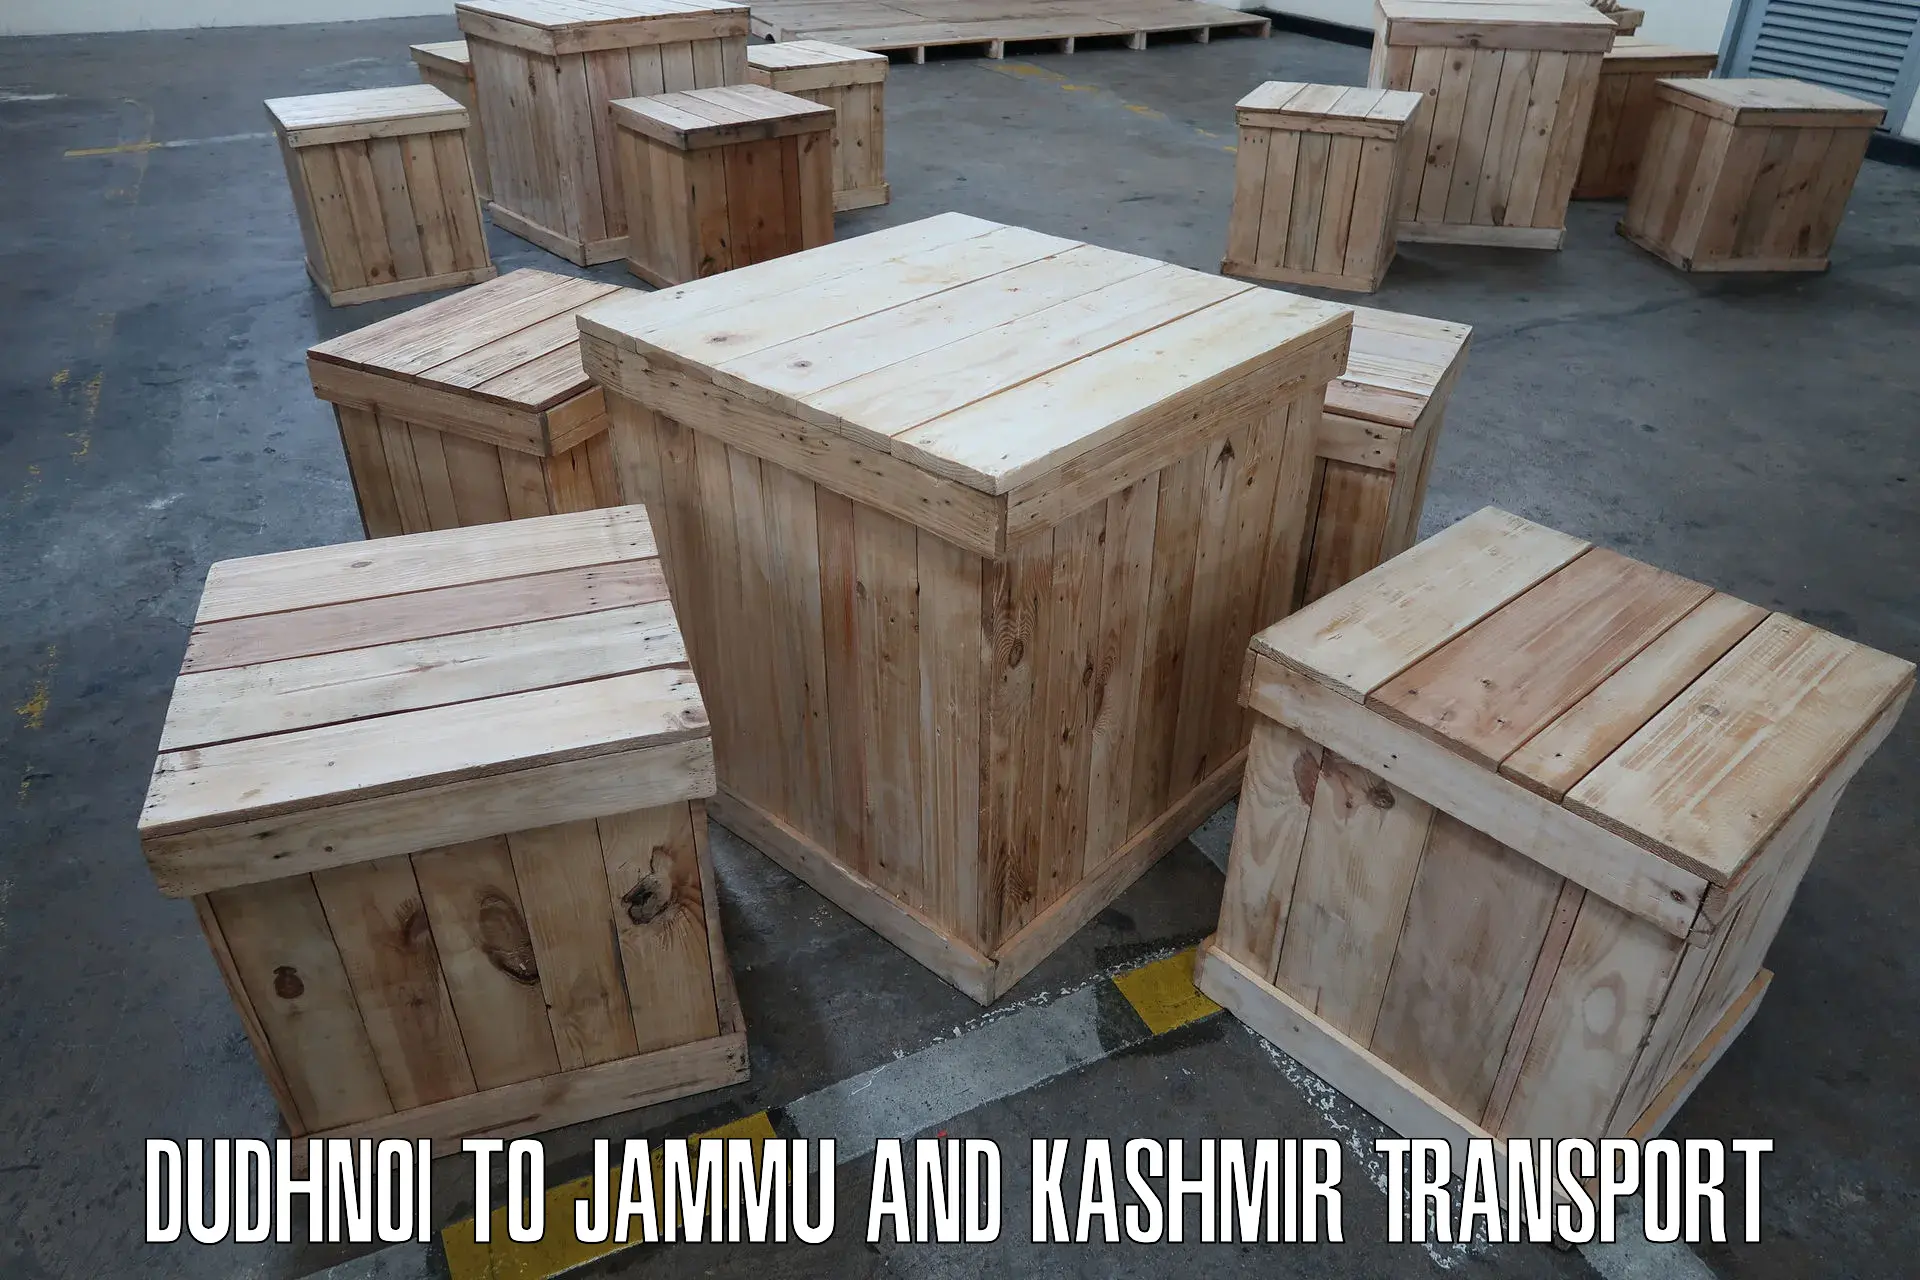 Express transport services Dudhnoi to Jammu and Kashmir